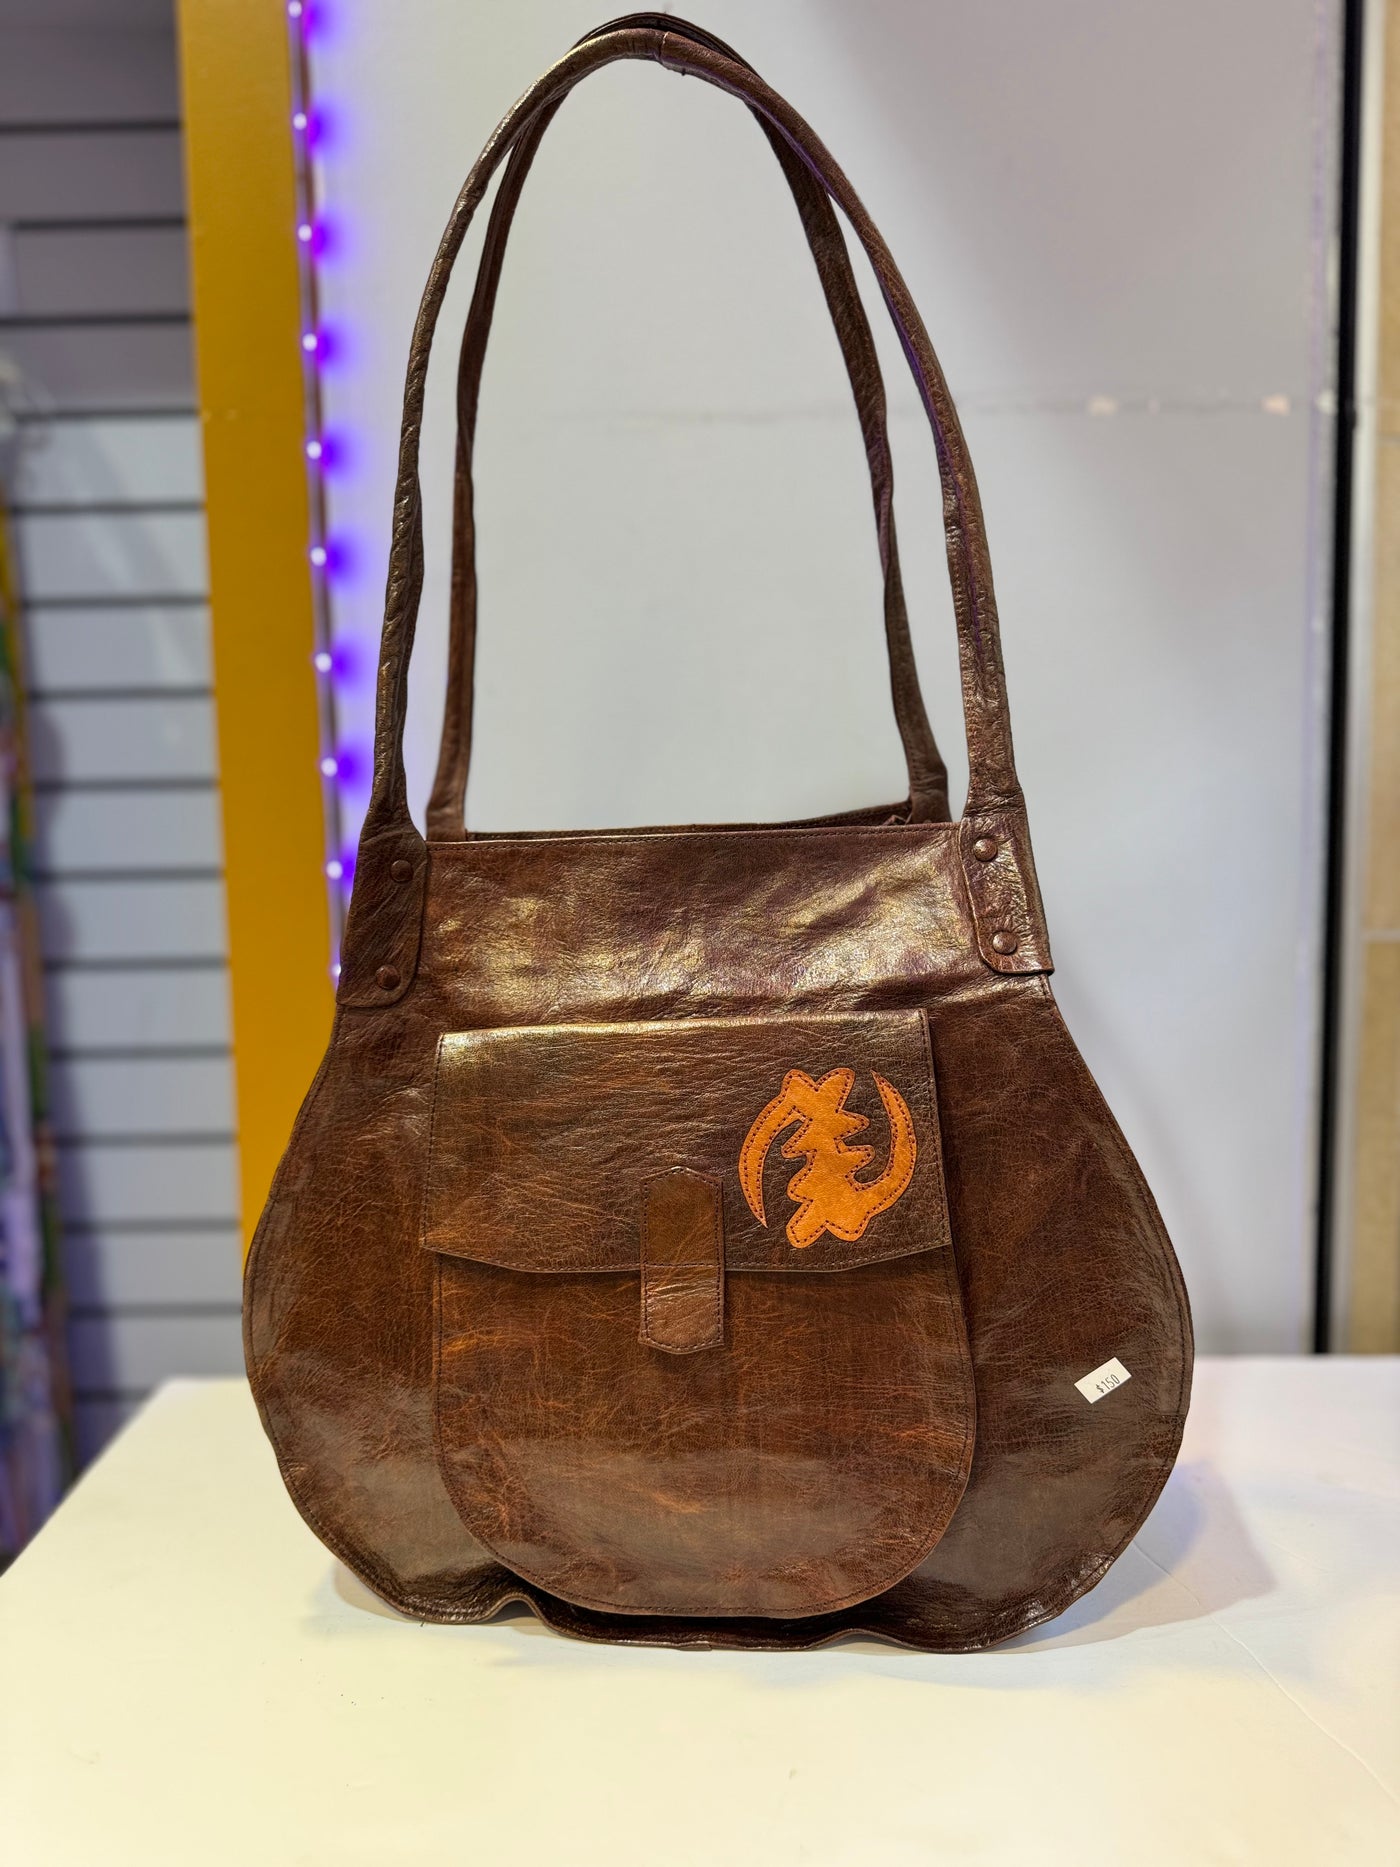 Heritage Unleashed: Exquisite Handmade Leather Bag from Mali